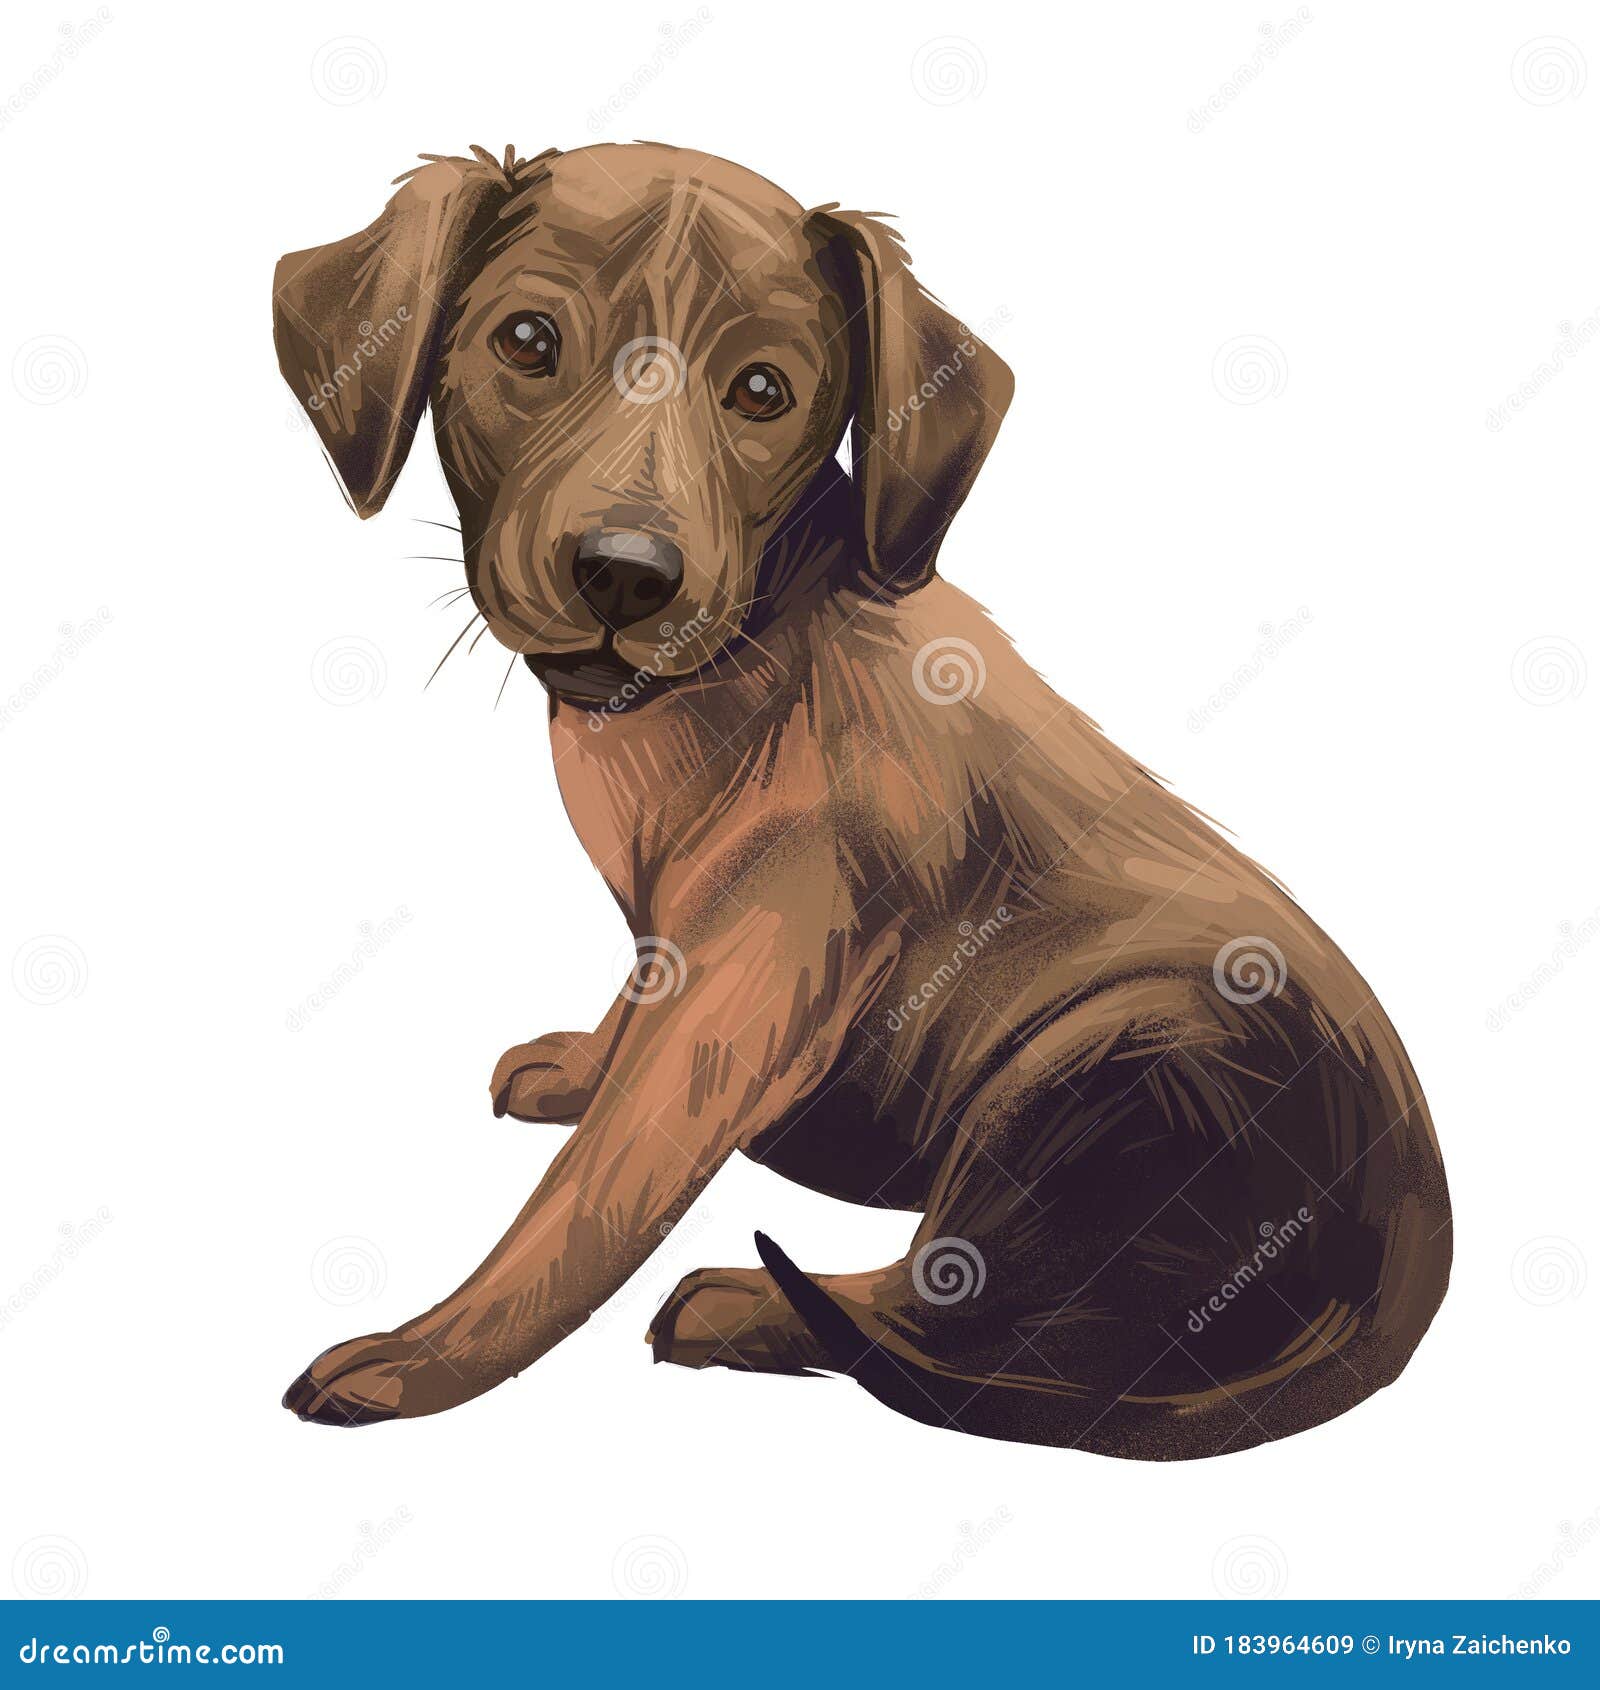 Treeing Cur Dog Isolated Digital Art Illustration Hand Drawn Dog Muzzle Portrait Puppy Cute Pet Dog Breeds Originating From Stock Illustration Illustration Of Curly Face 183964609